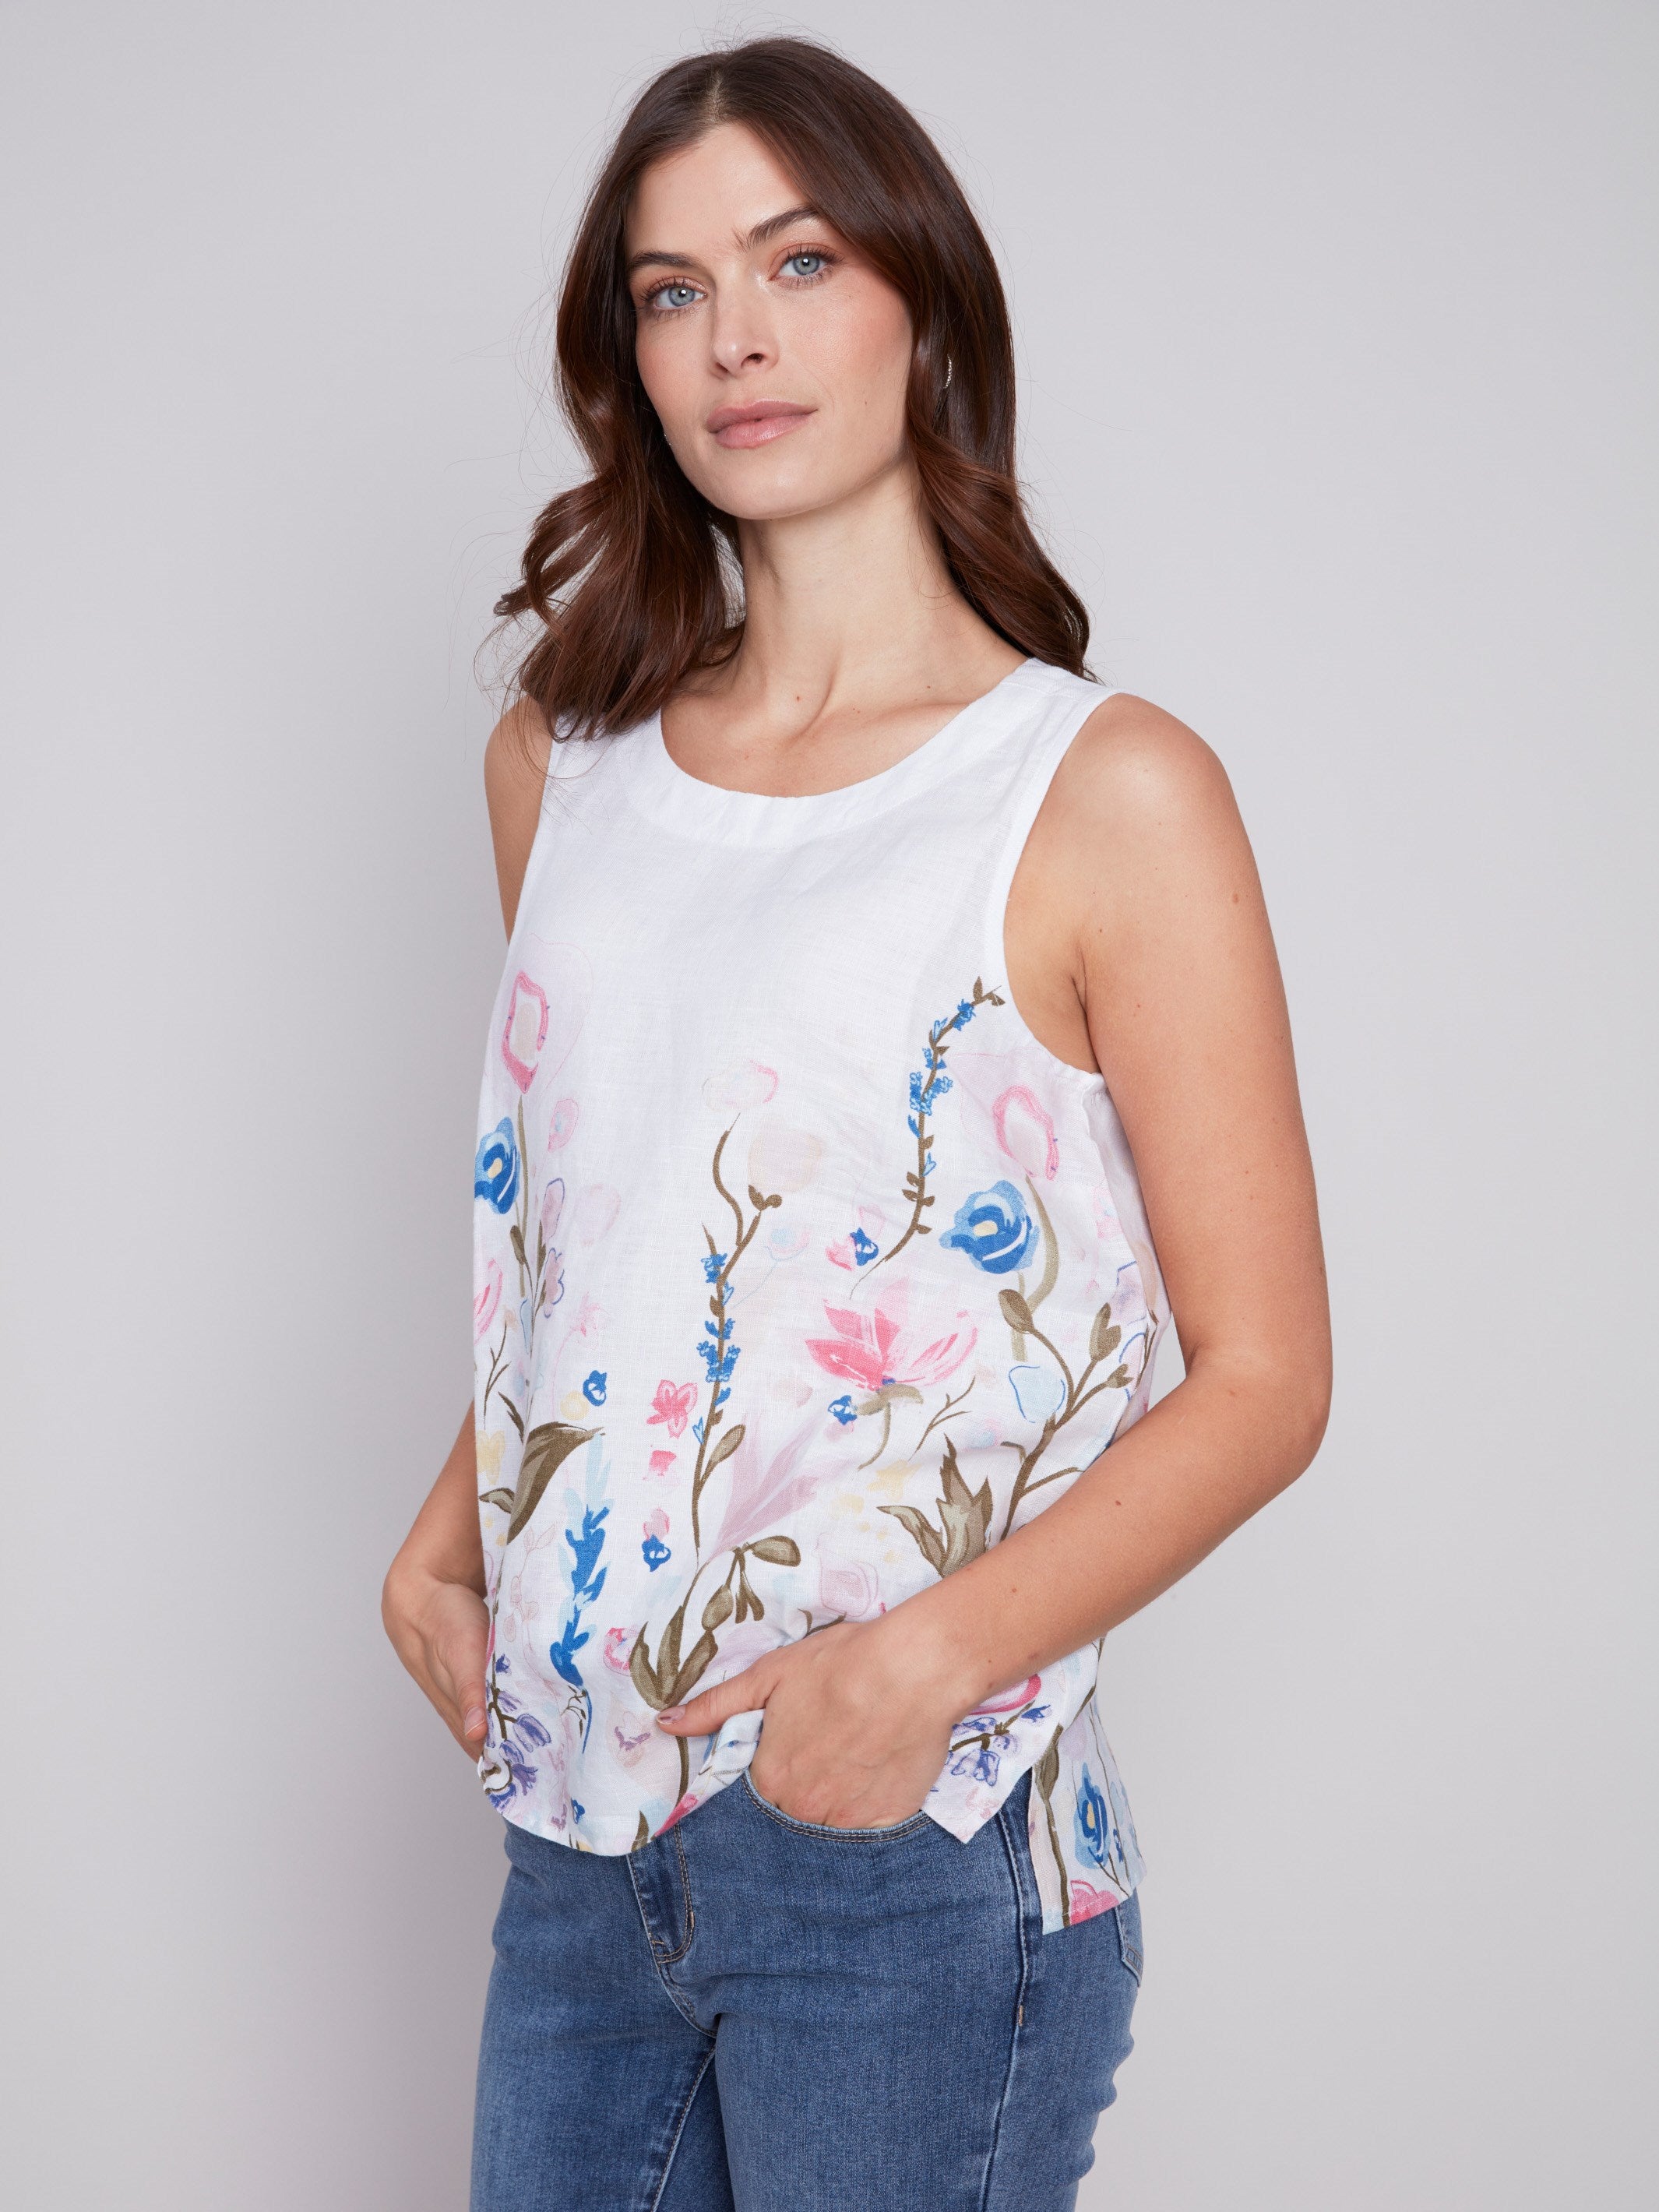 Sleeveless Floral Printed Linen Top - Pastel - Charlie B Collection Canada - Image 1